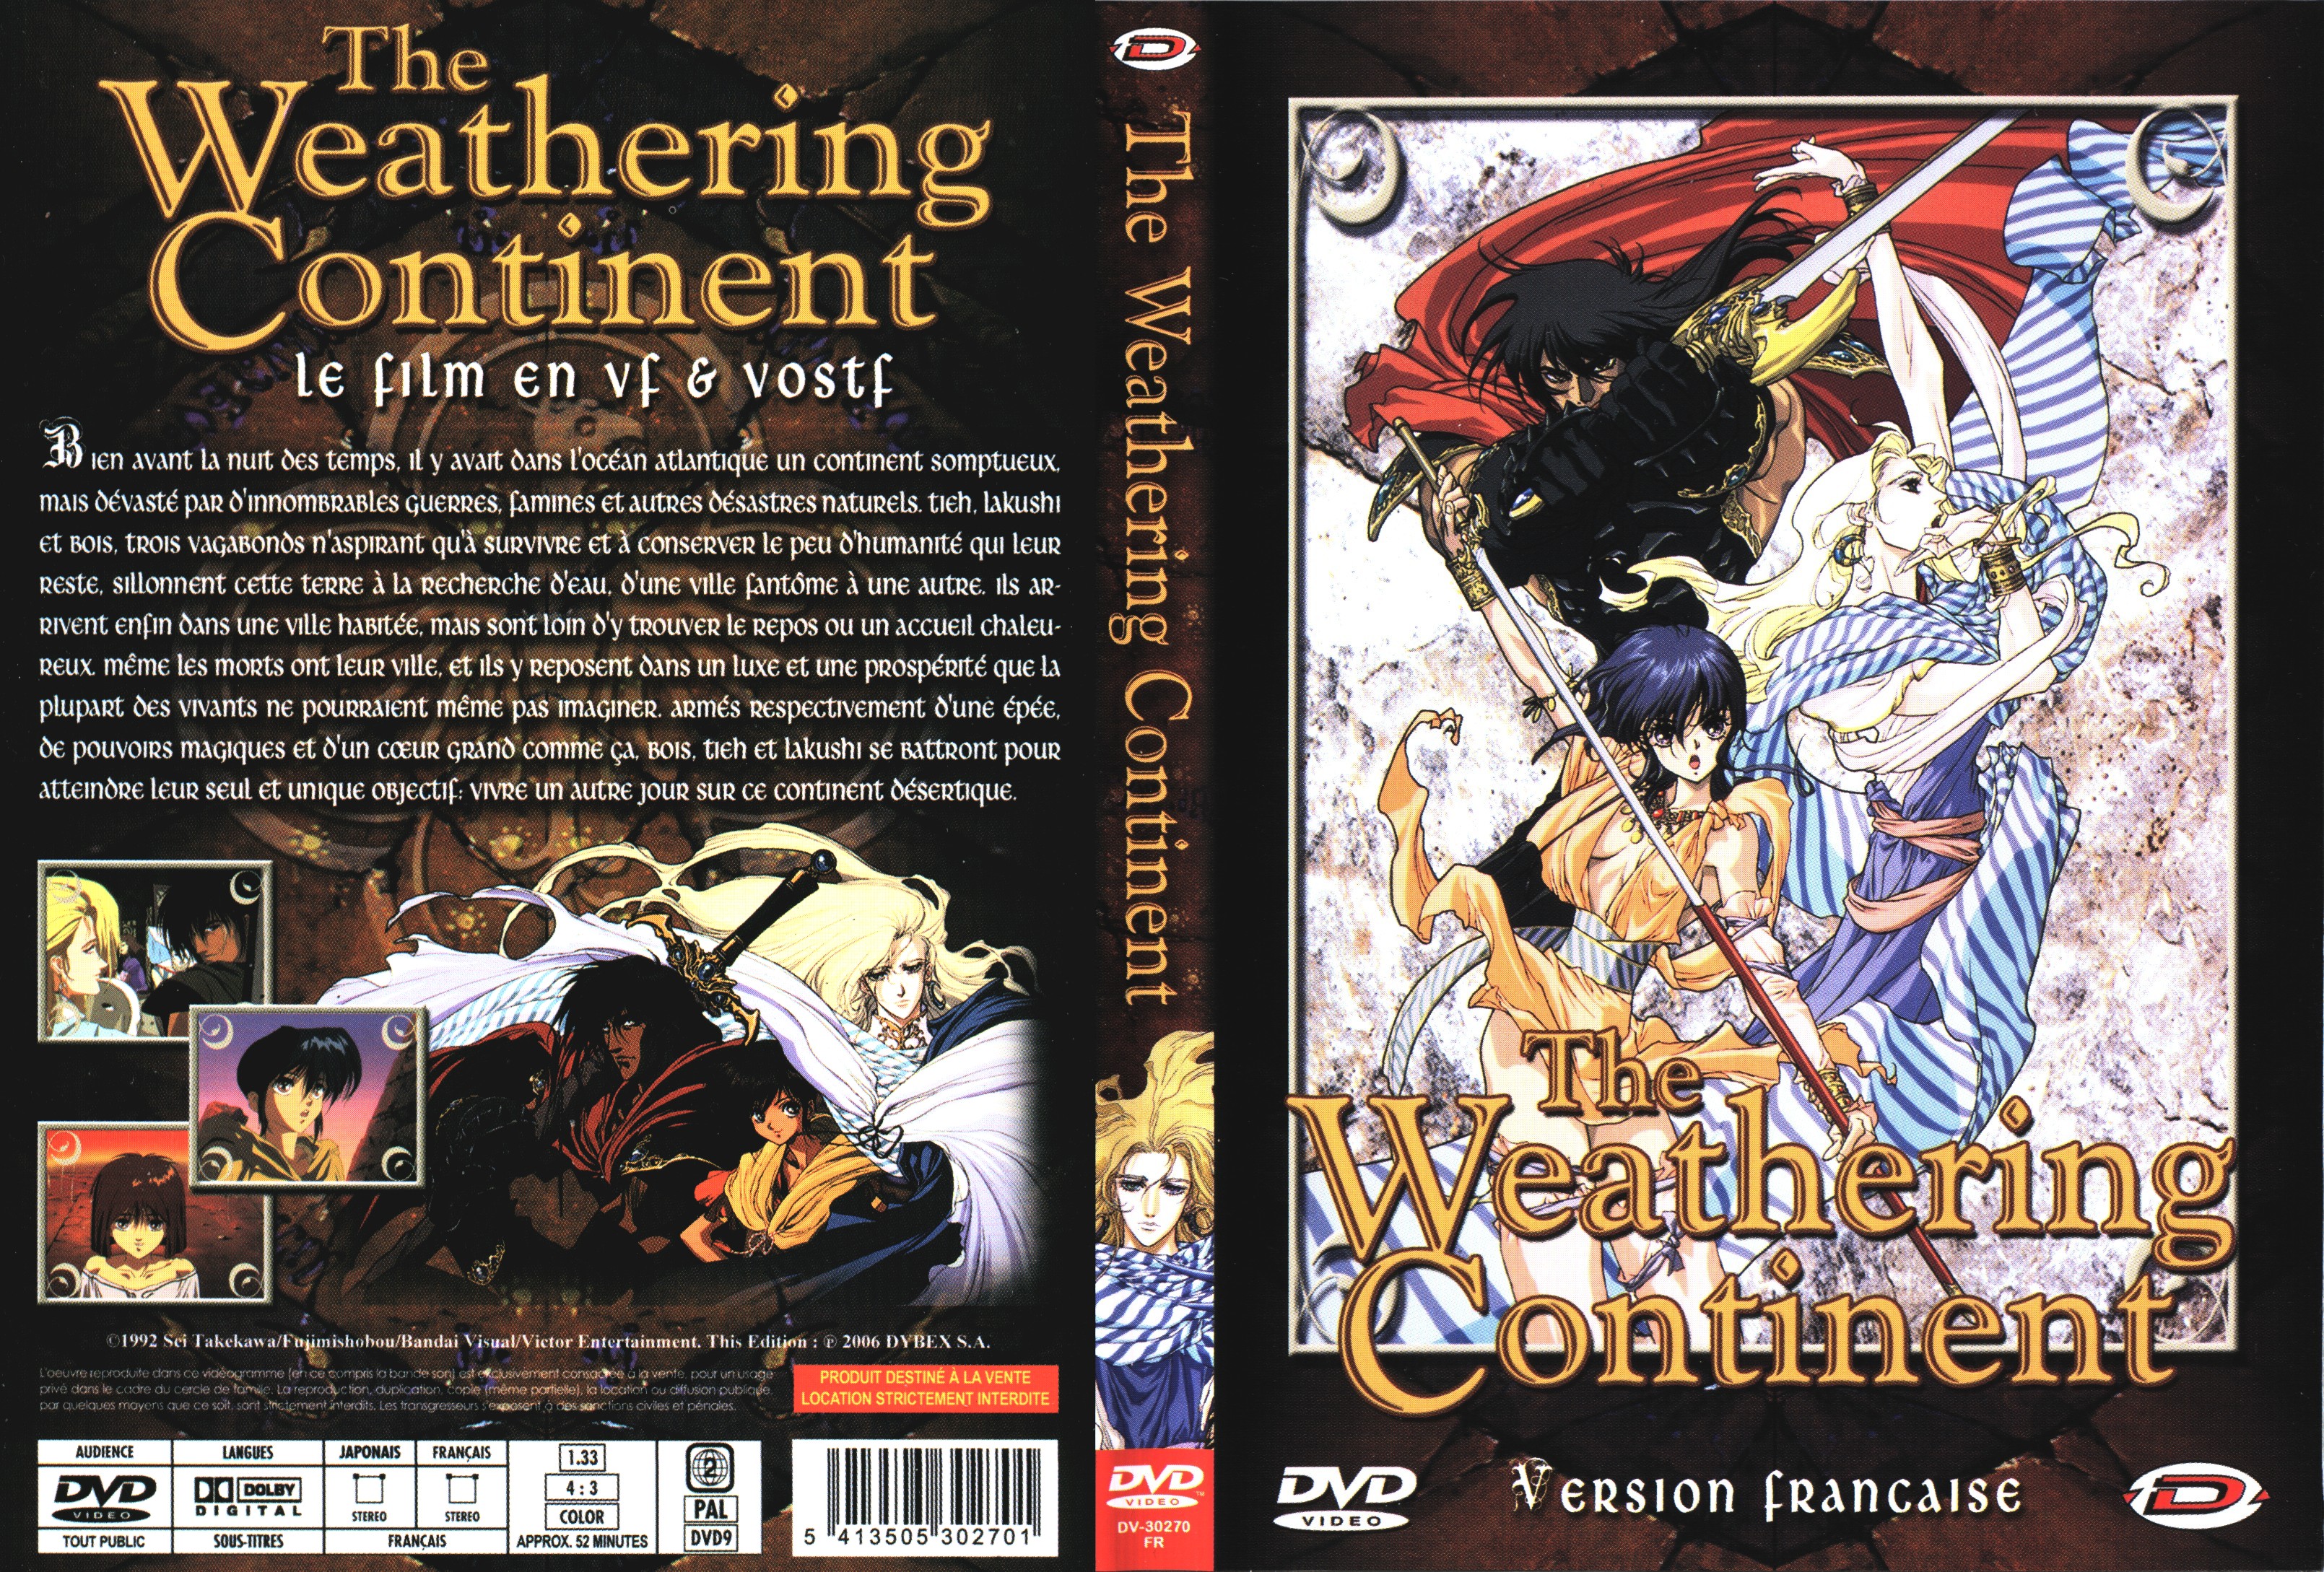 Jaquette DVD The weathering continent